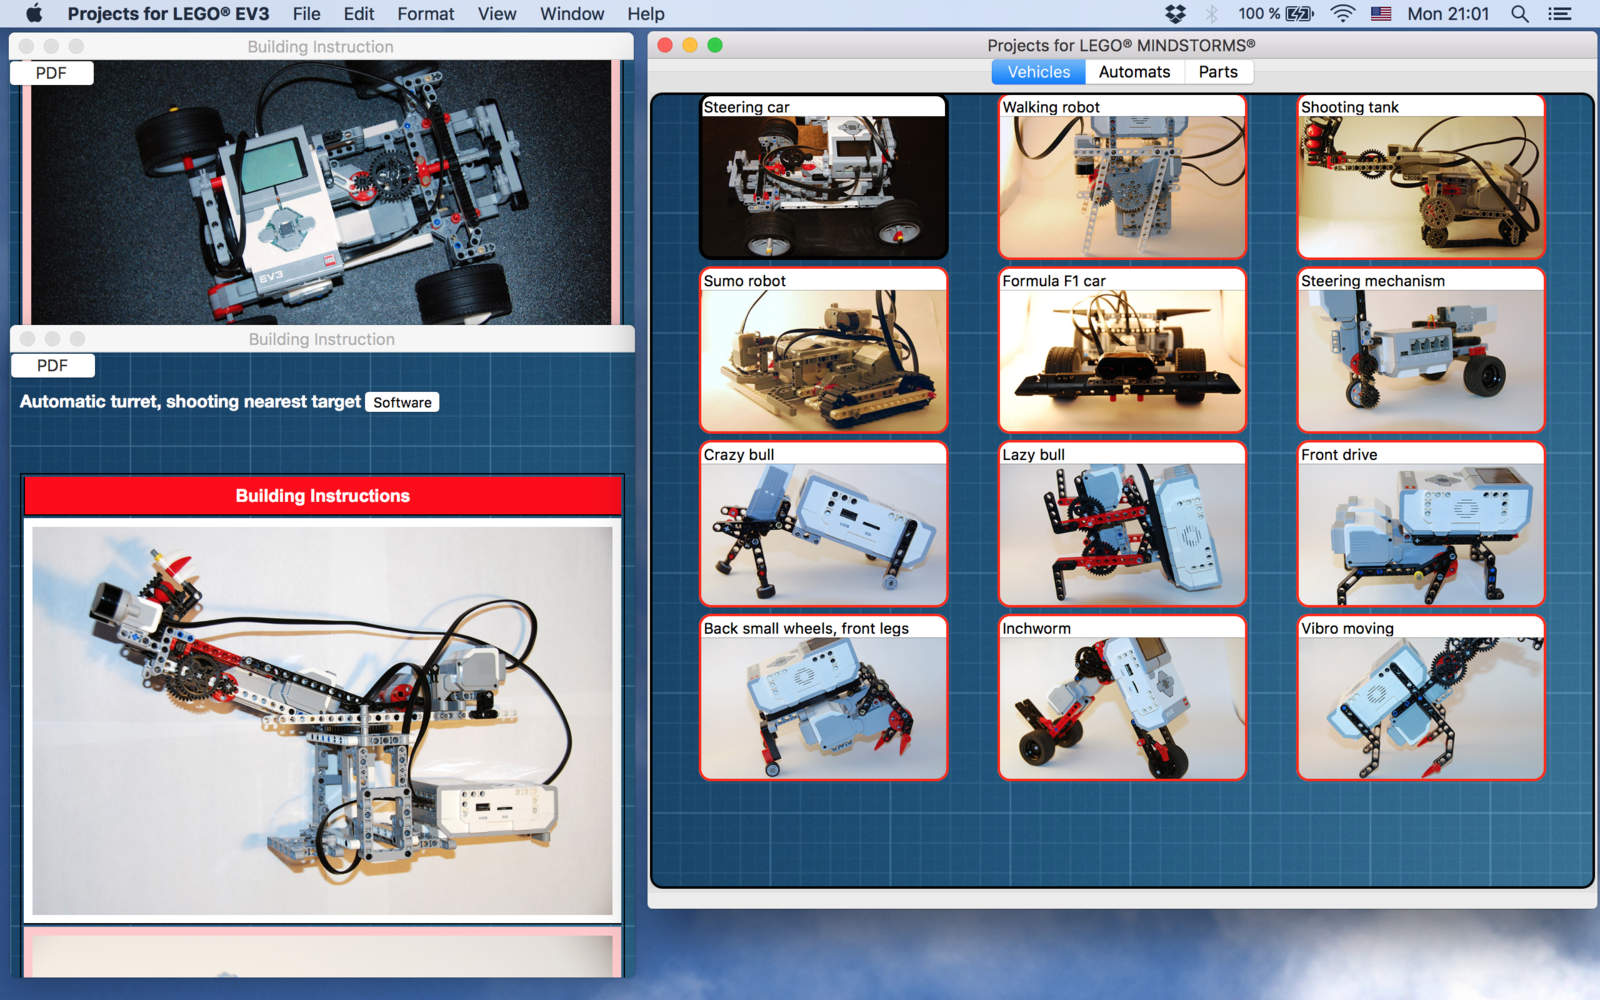 ProjectsBox for LEGO® MINDSTORMS® 1.0 : Main Window